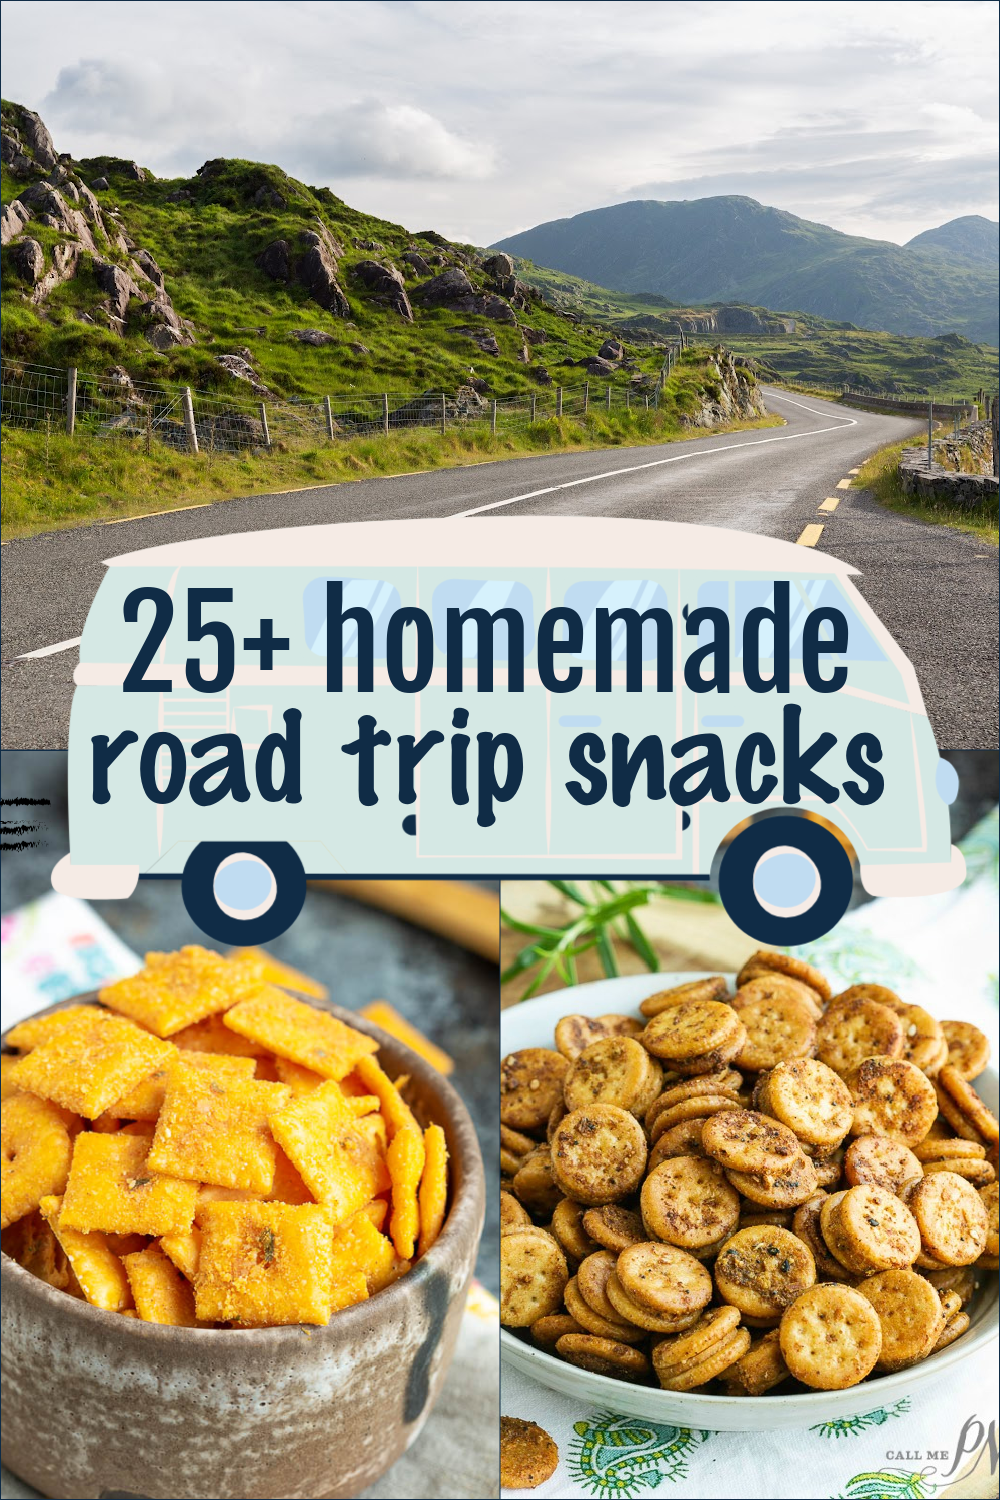 By thoughtfully preparing and packing your homemade snacks, you’ll enhance your travel experience with tasty, healthy options that keep you energized and satisfied.